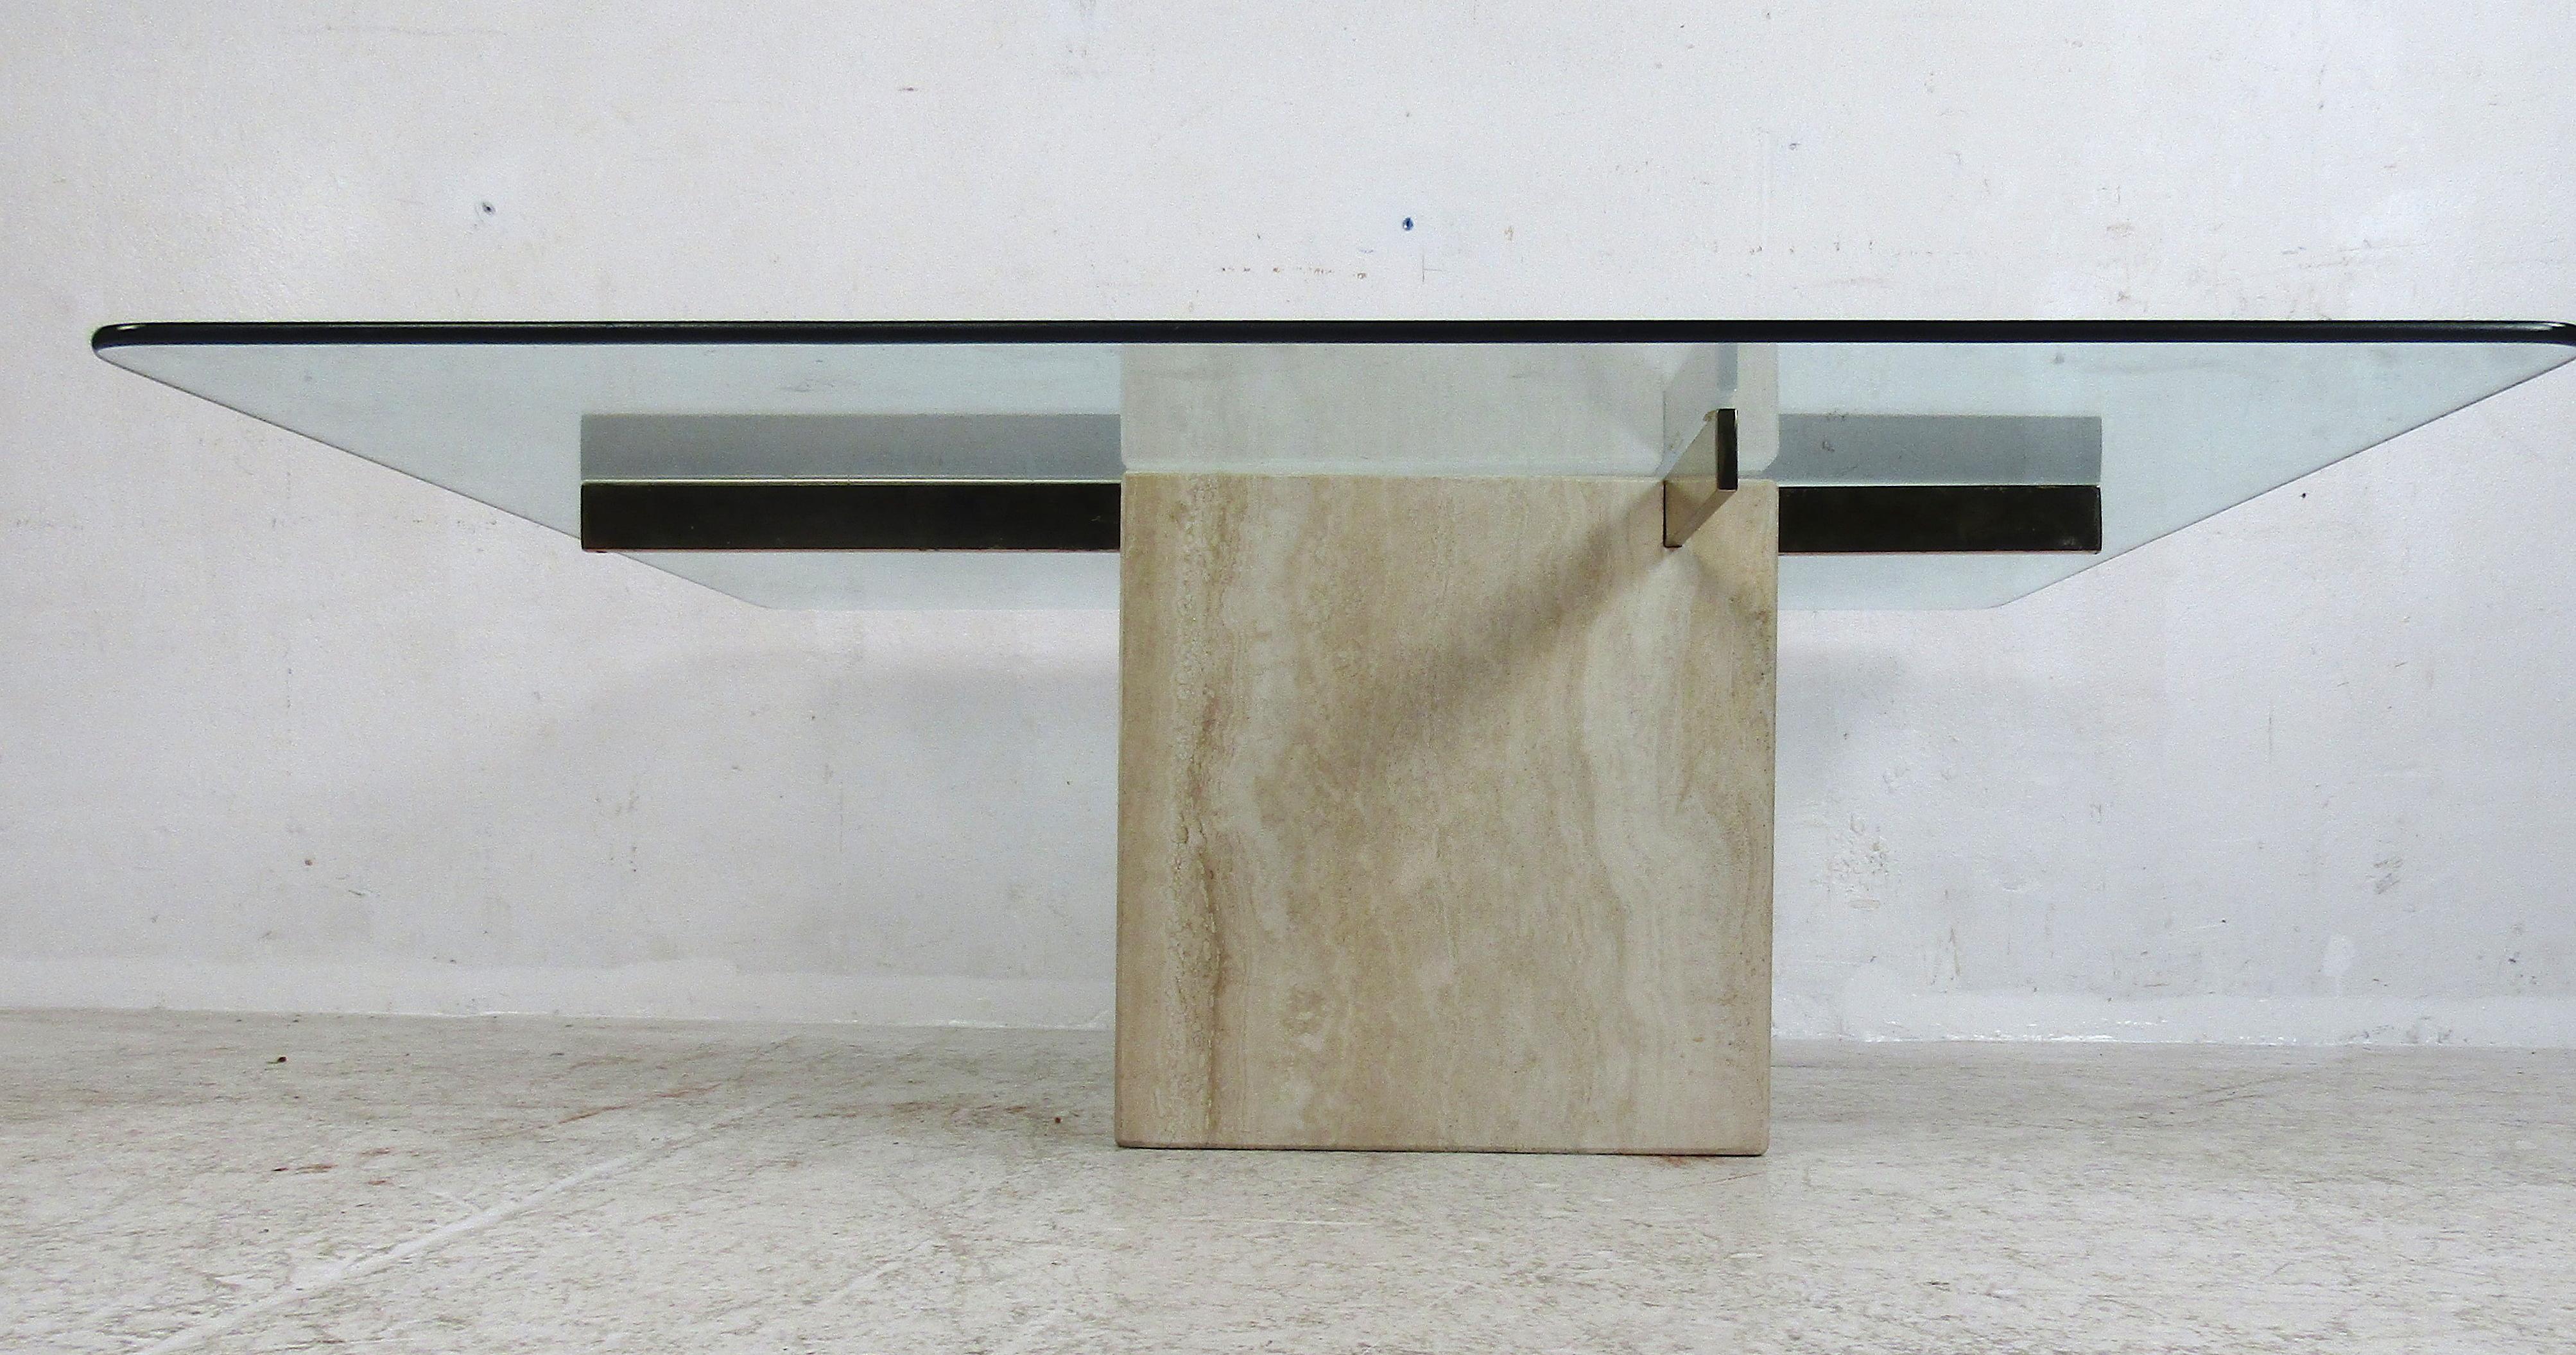 This stunning vintage modern Artedi coffee table features a thick square glass top with a travertine base. Sleek design with two brass supports fitted inside the travertine base holds the large glass tabletop. This elegant piece makes the perfect